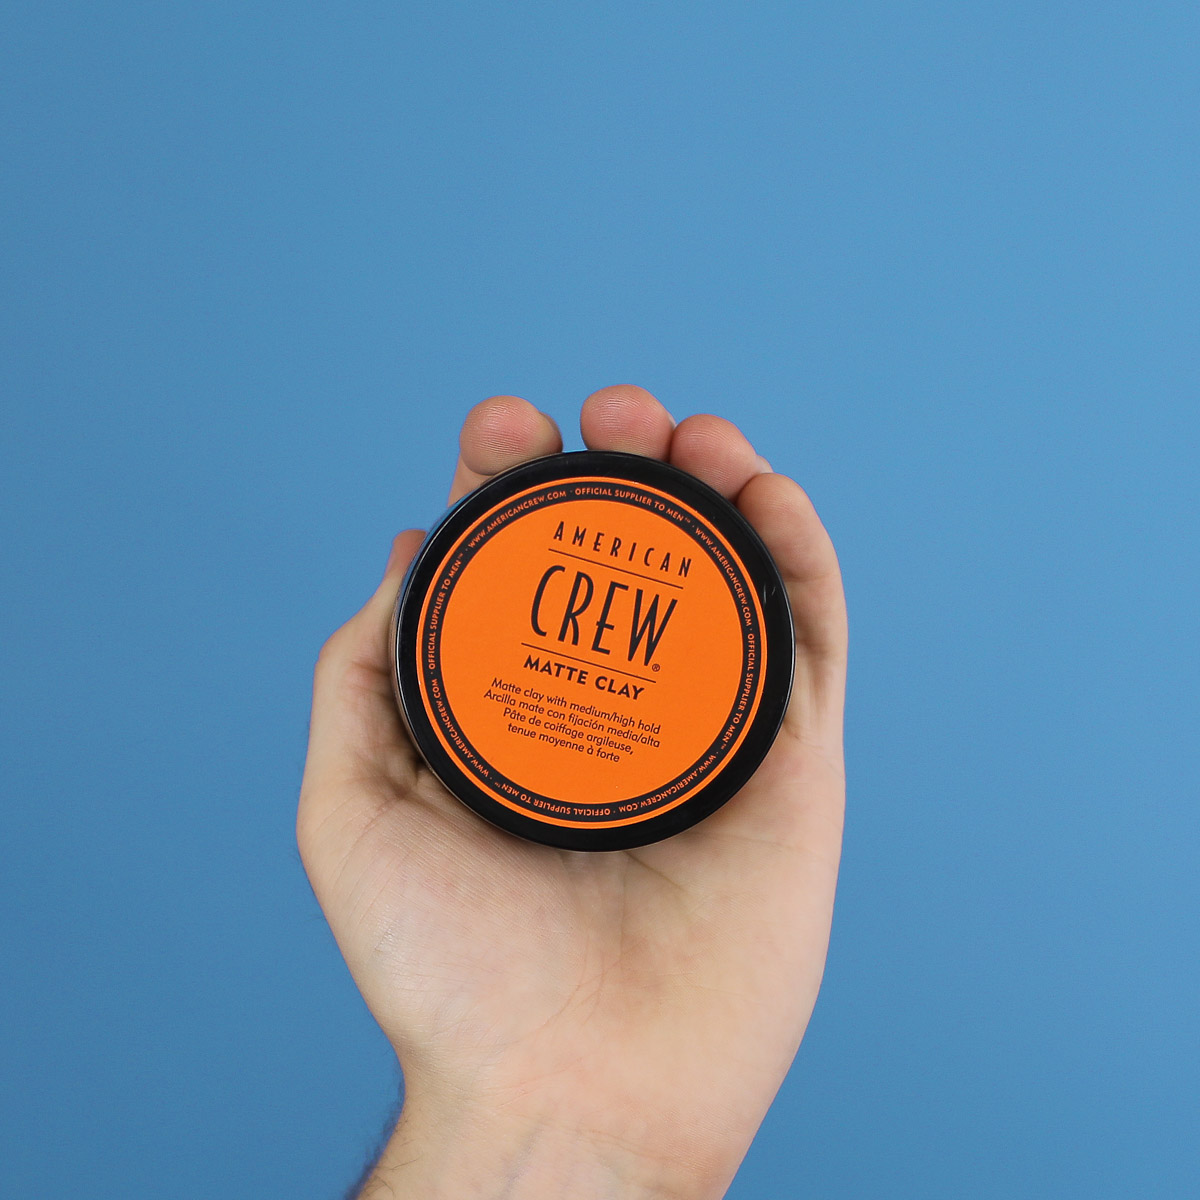 american-crew-matte-clay-product-review-man-for-himself